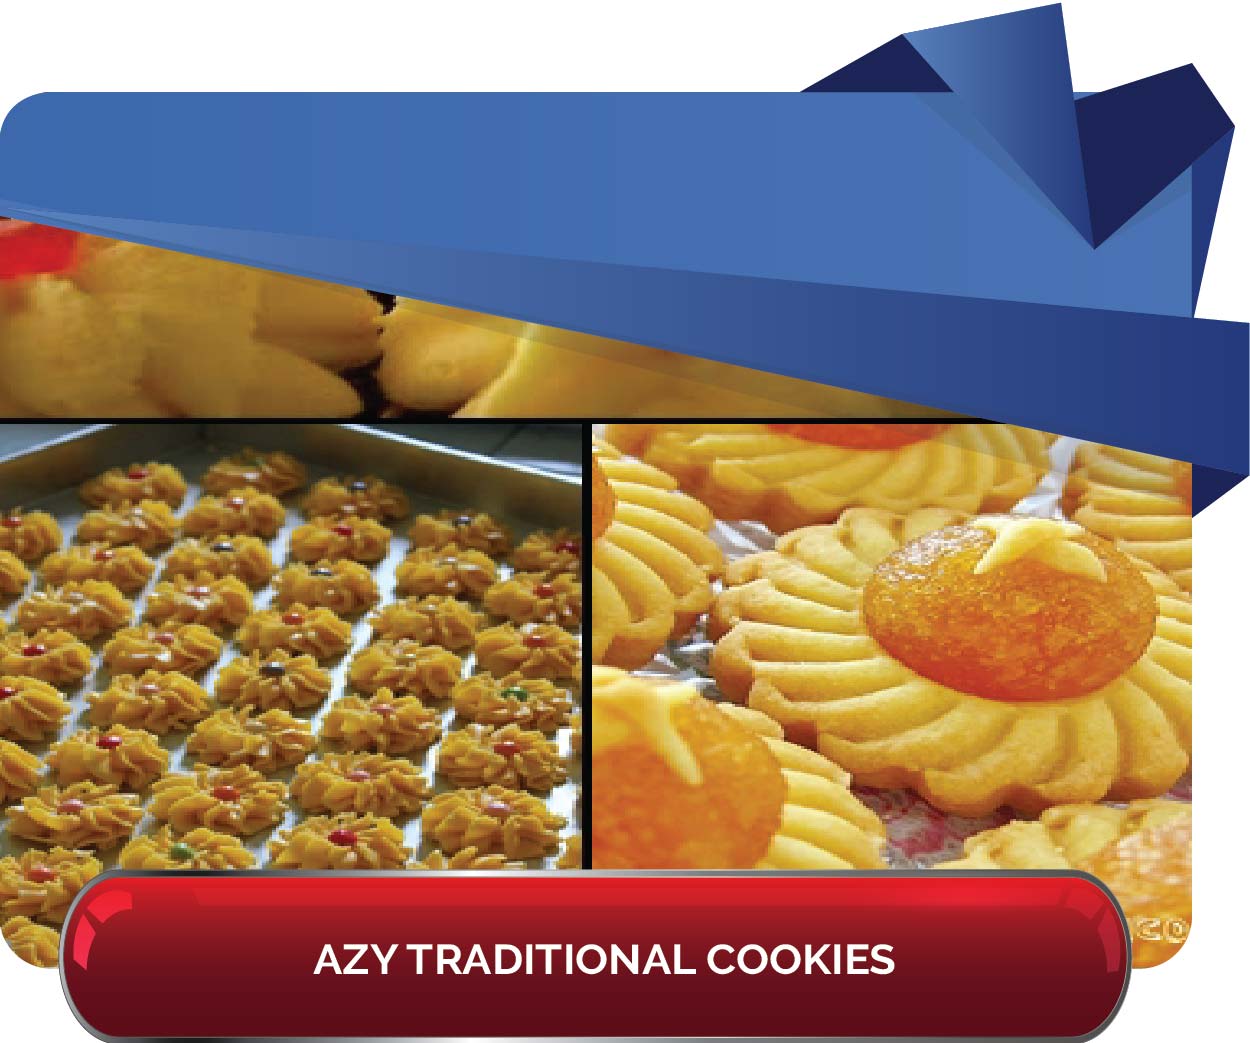 azy traditional cookies 01